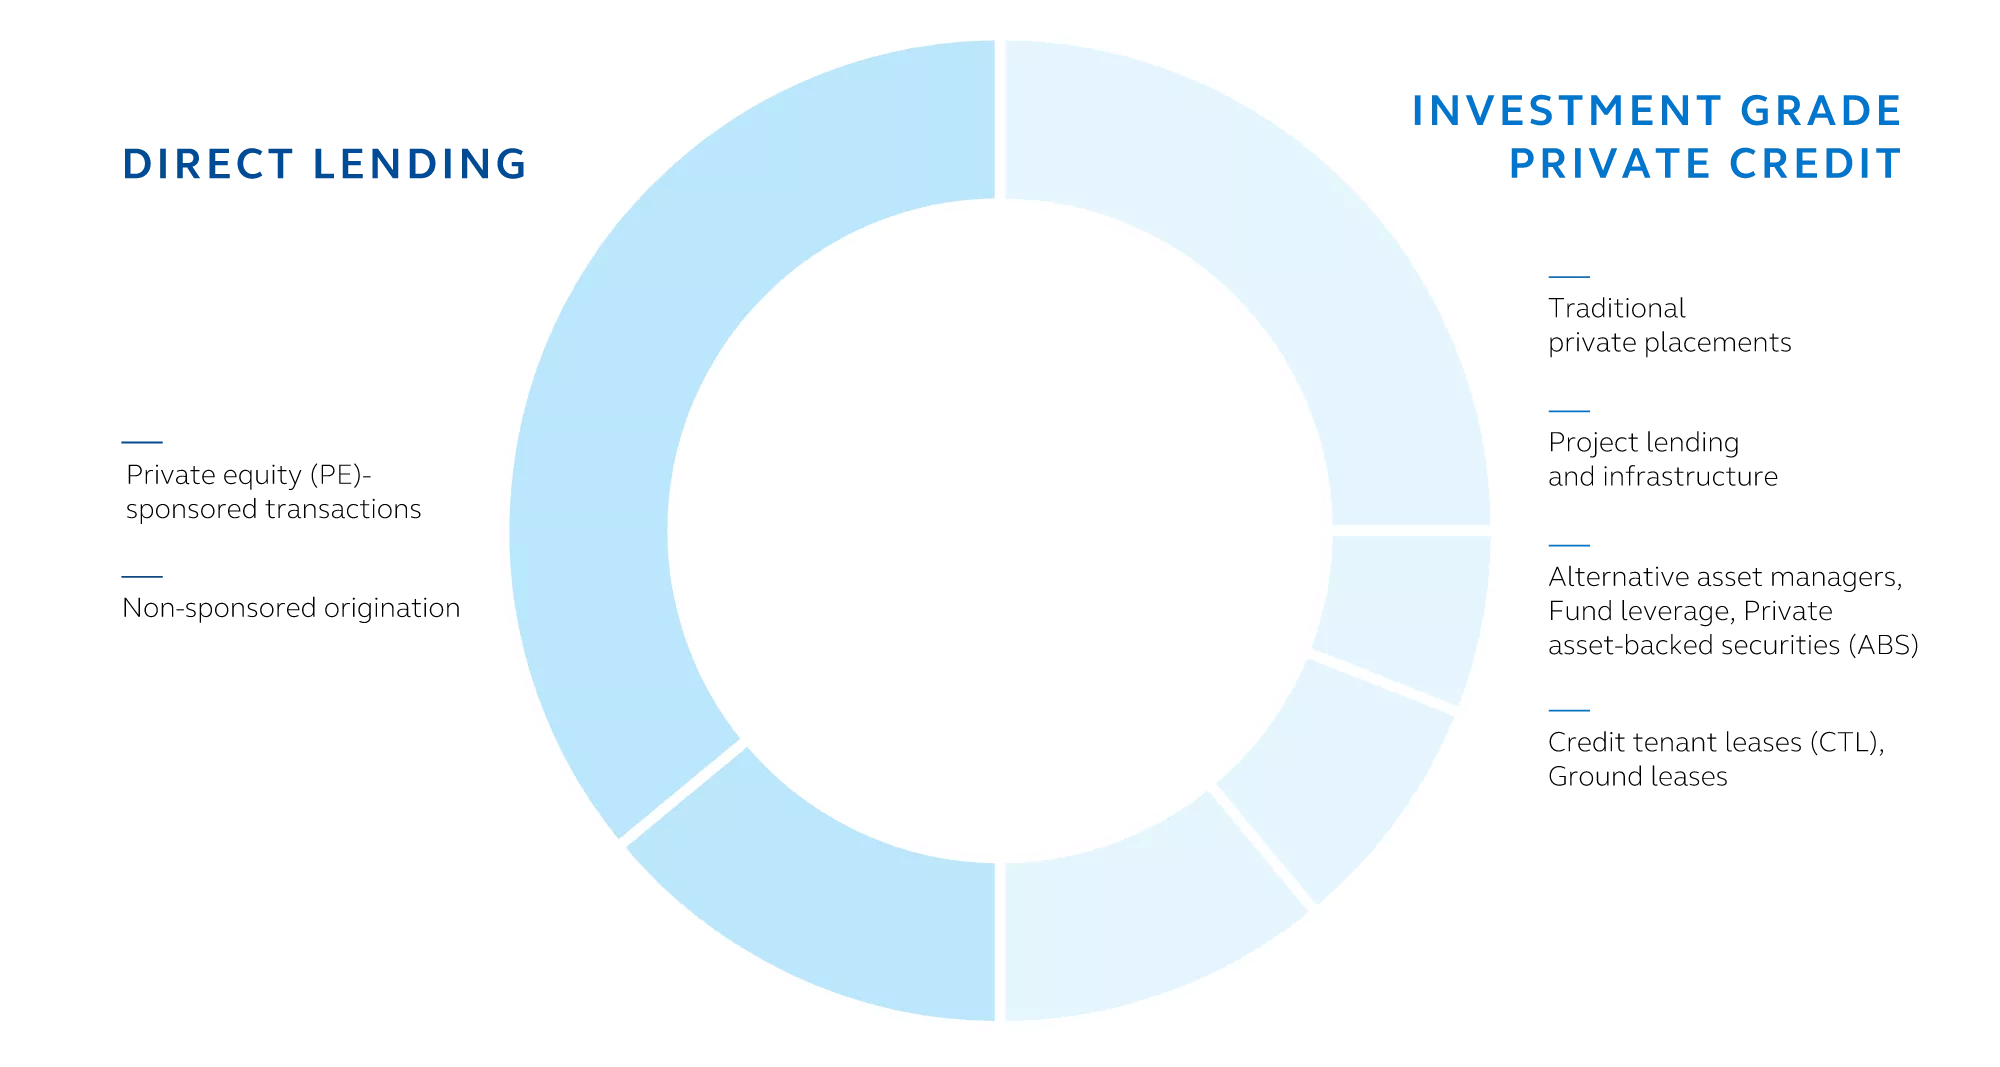 Pie chart breakdown of Principal Asset Management investment capabilities between direct lending and investment grade private credit